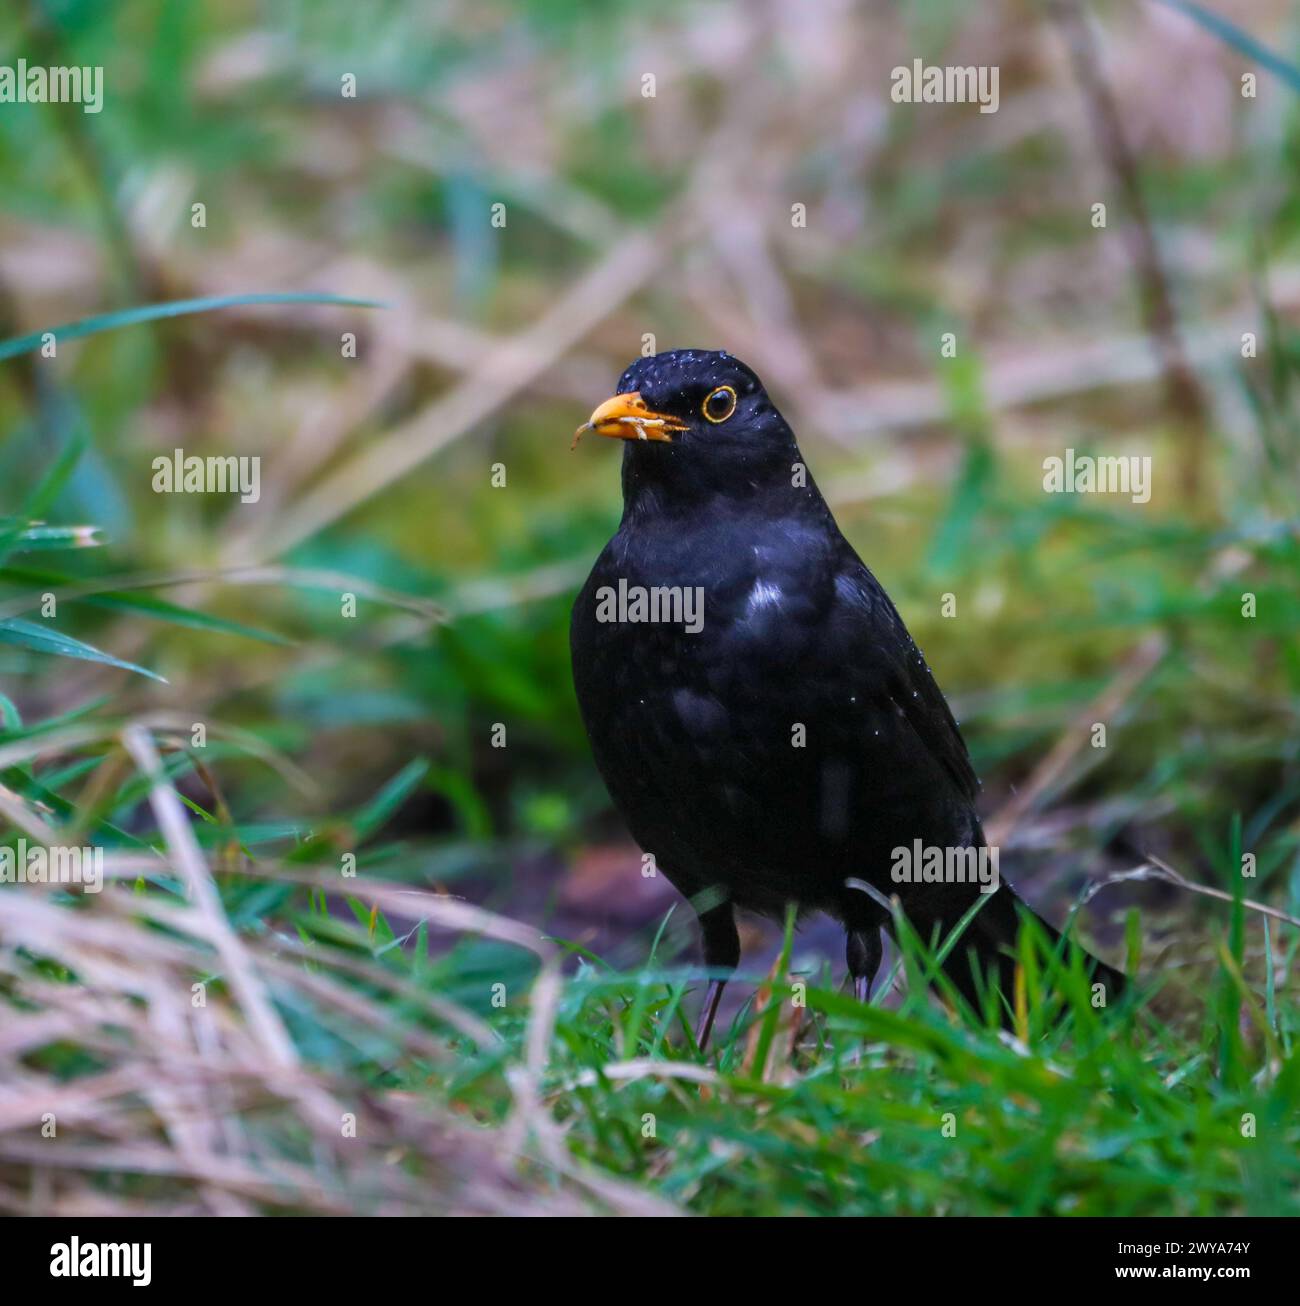 A closeup shot of a blackbird holding worms in its beak for feeding Stock Photo